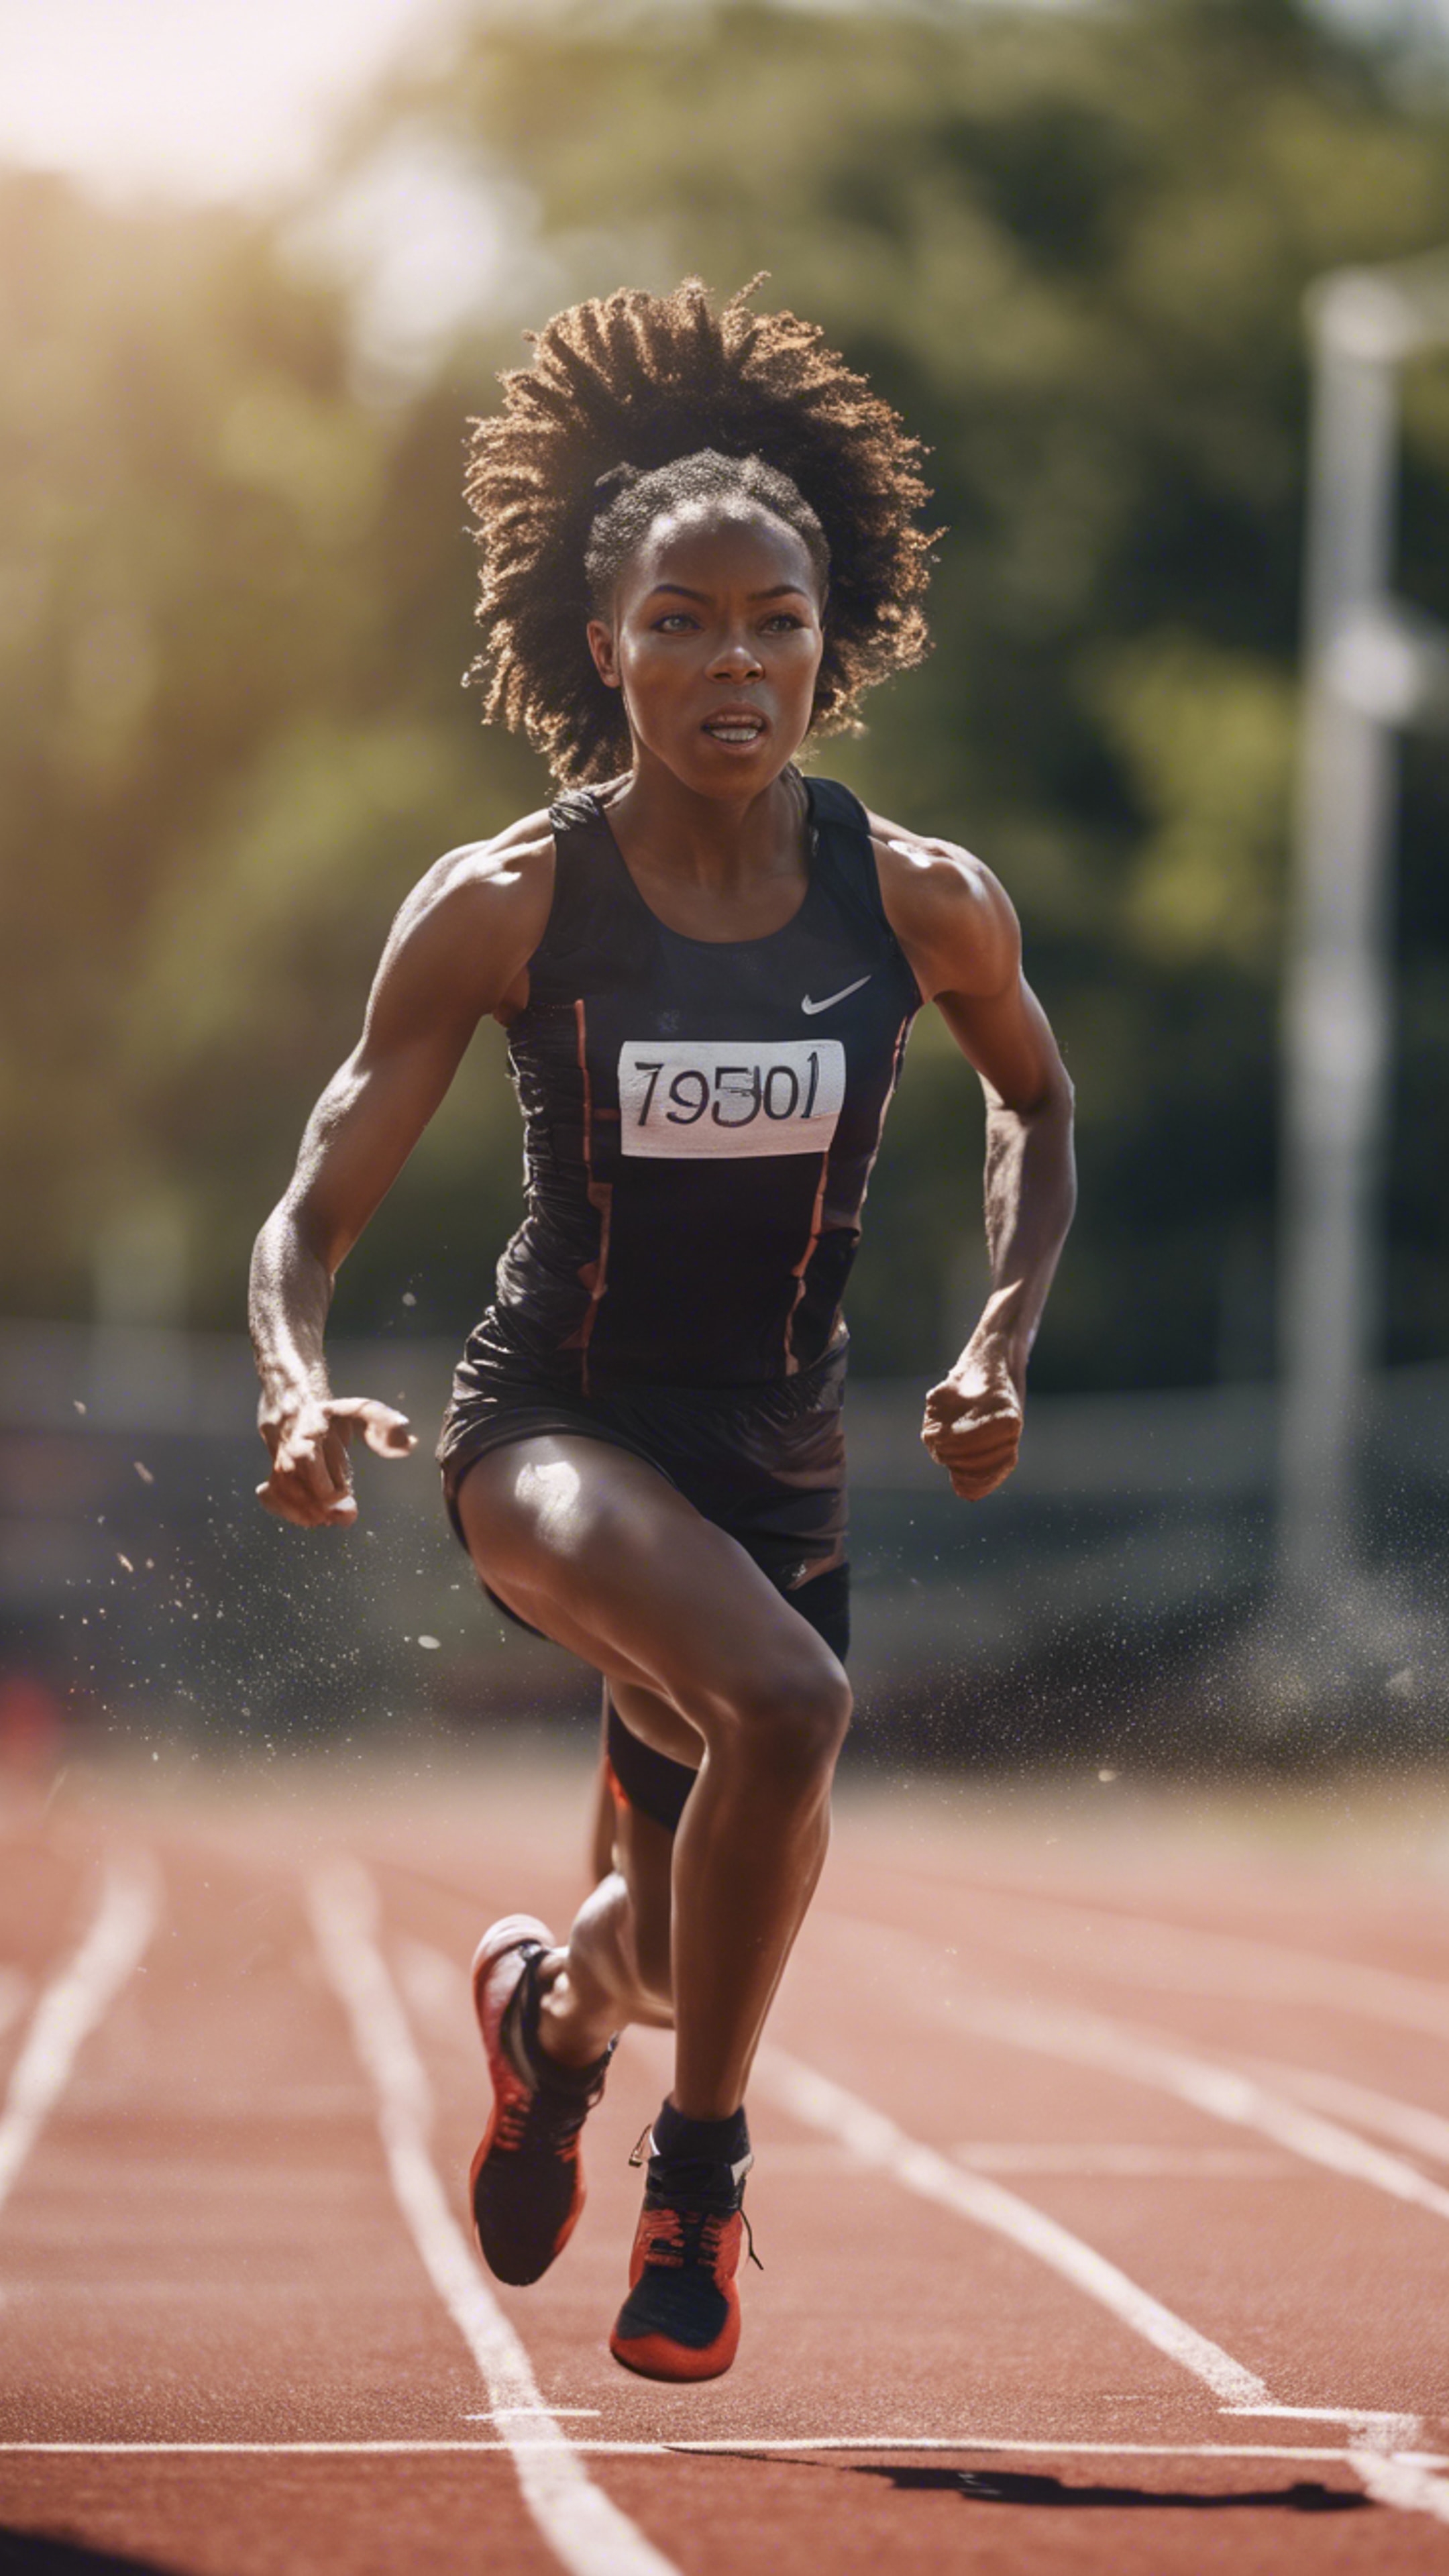 A dynamic image of a black girl engaging in competitive sprint, showing her vital energy. Тапет[76eb5b44f4a84b498fc2]